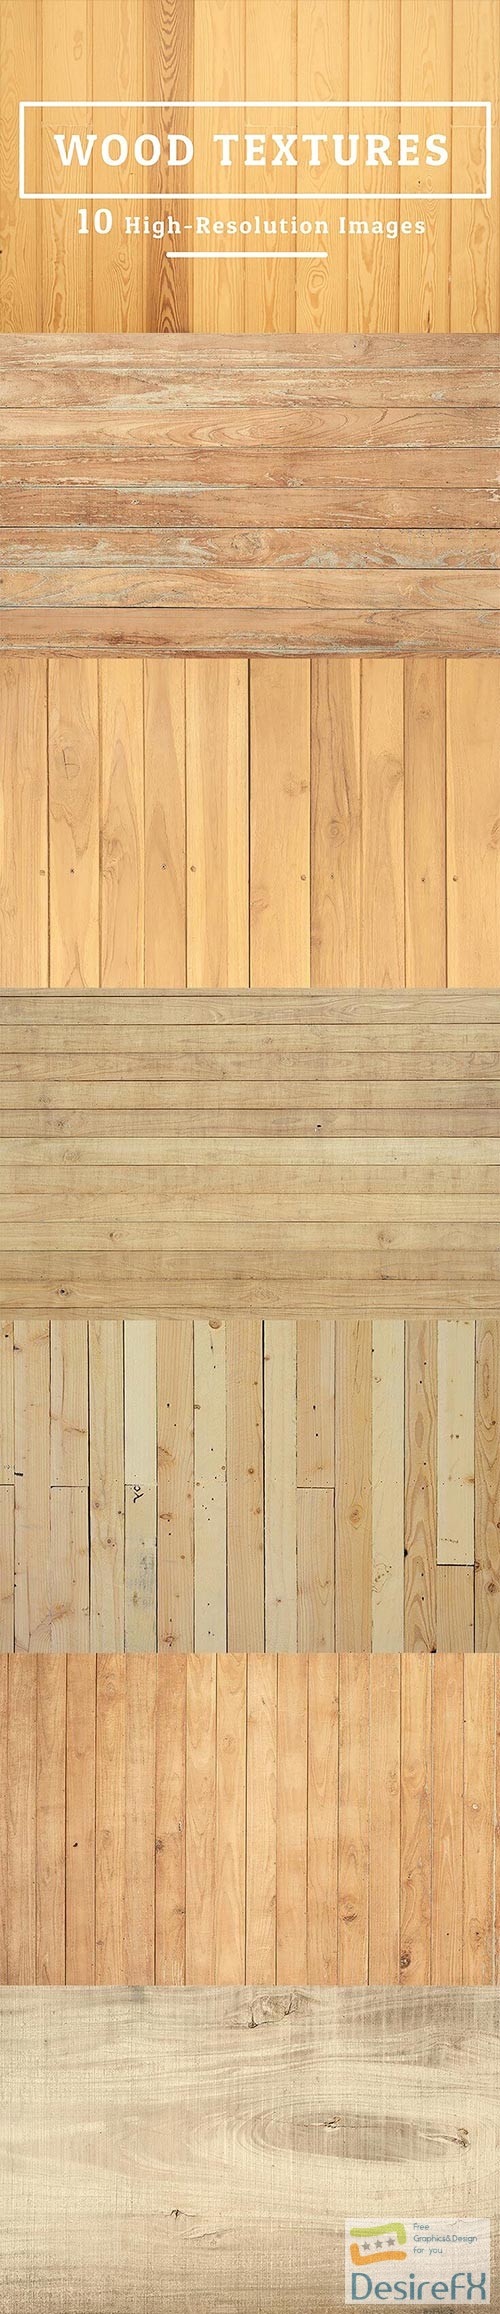 10 Wood Texture Background